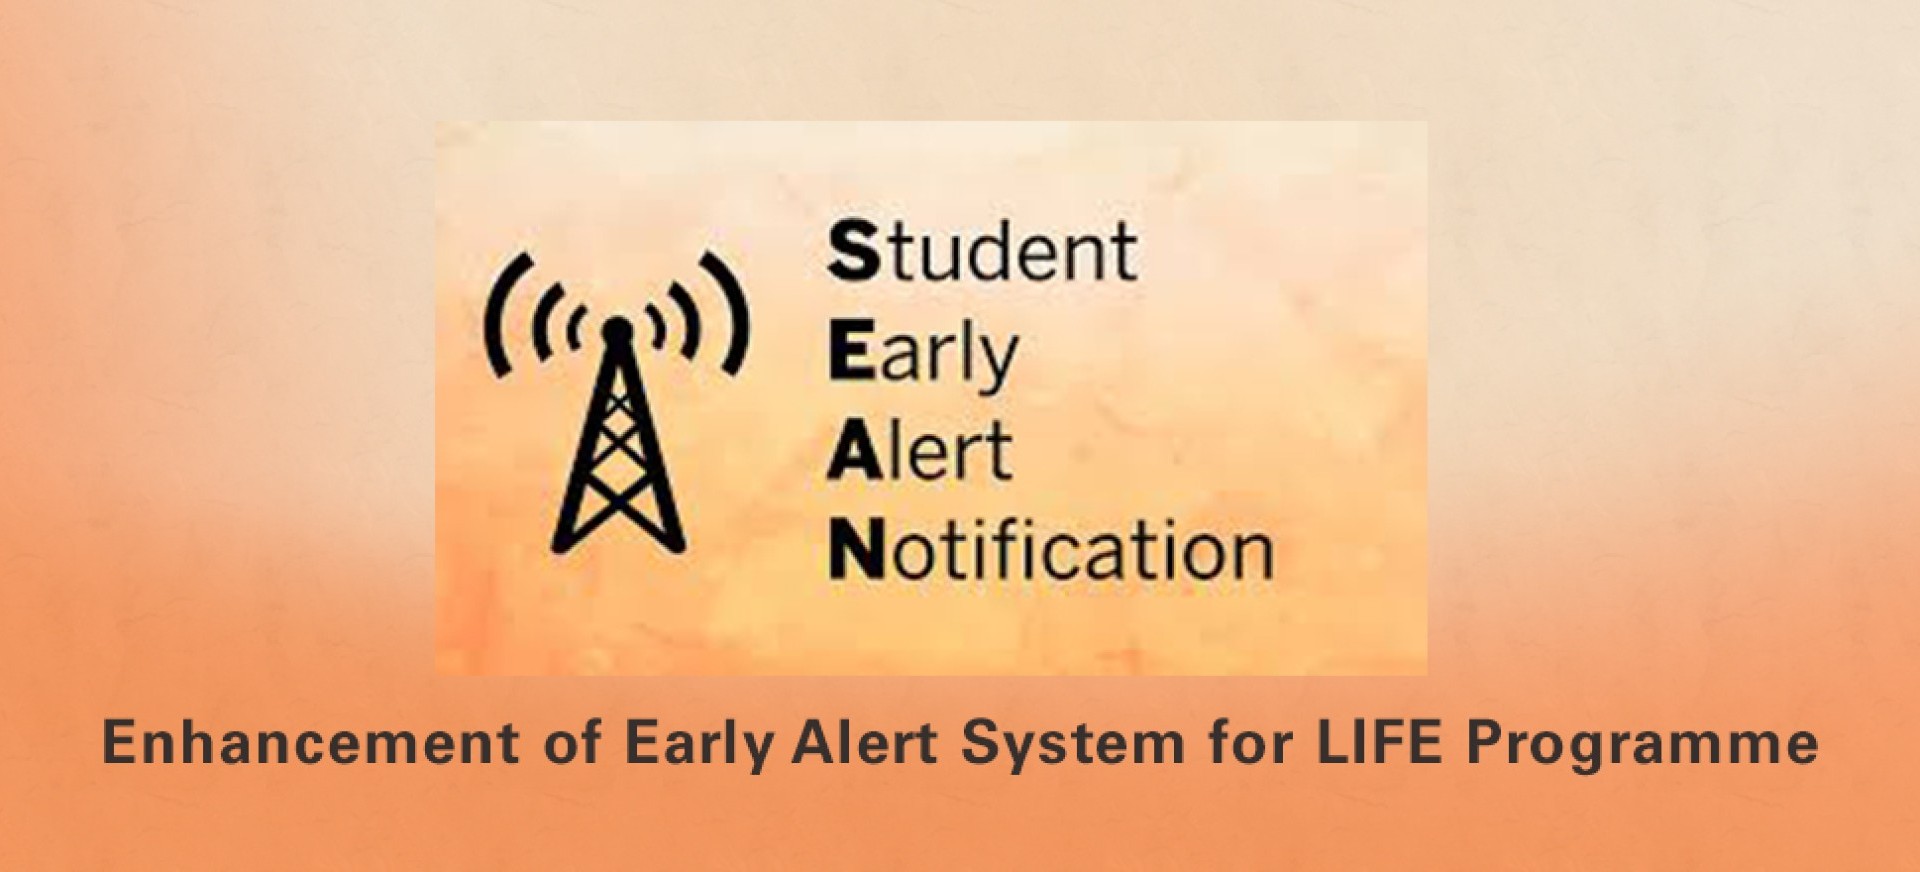 Enhancement of Early Alert System for LIFE Programme